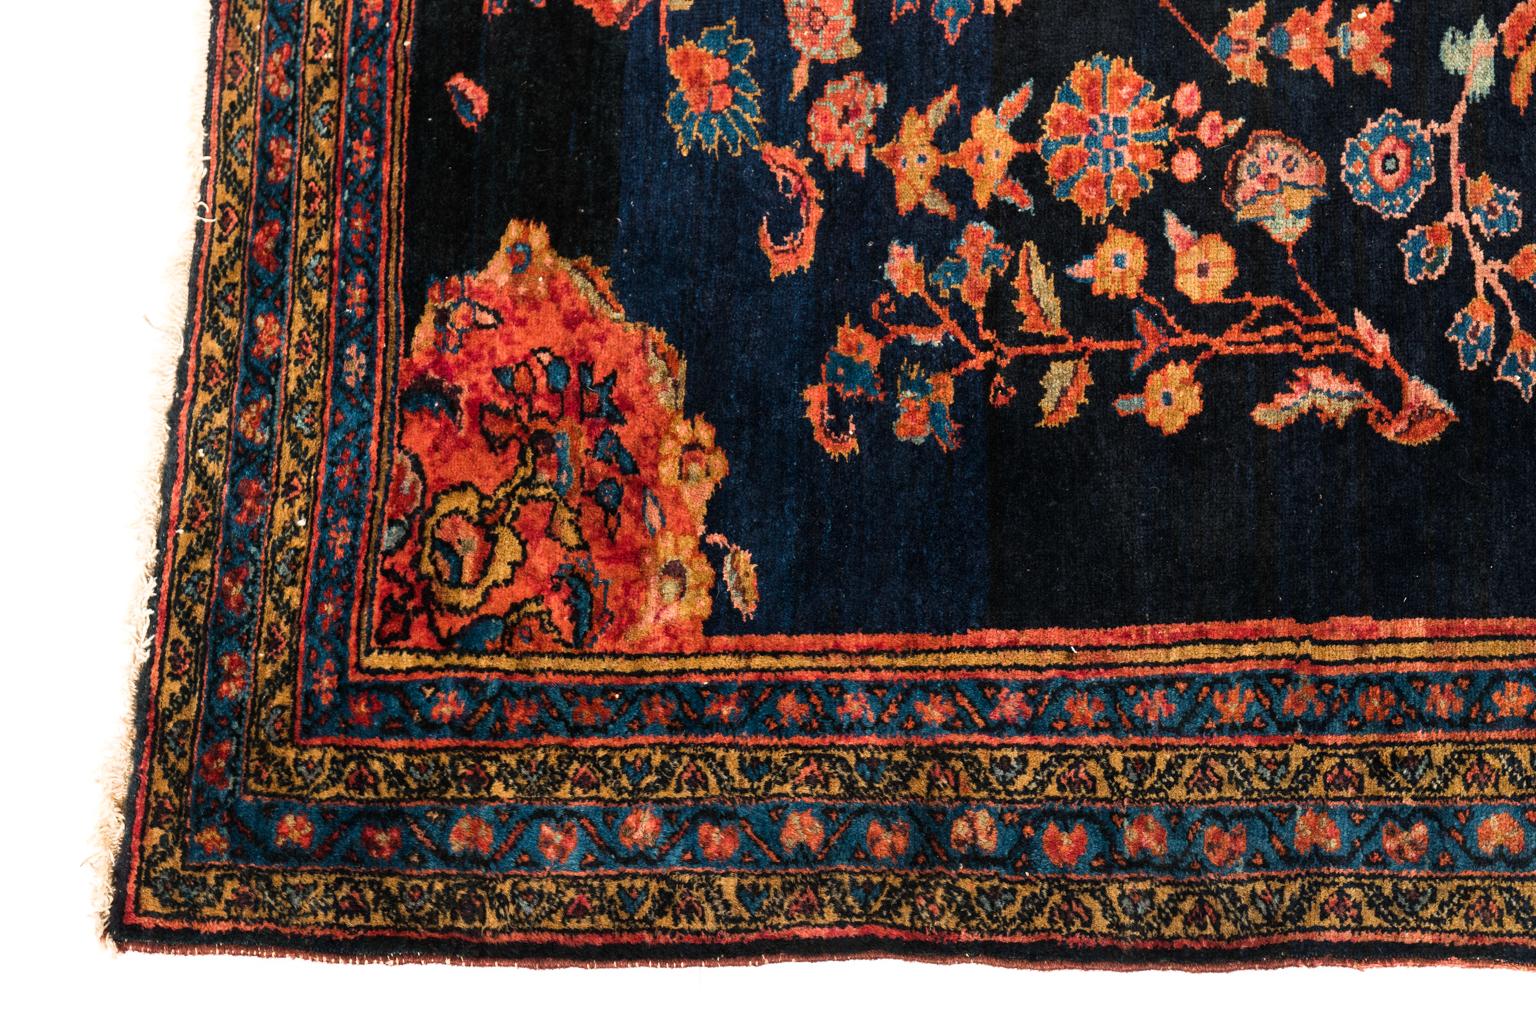 Early 20th century Caucasian rug with floral and geometric motifs, predominantly red hues on black background.
 